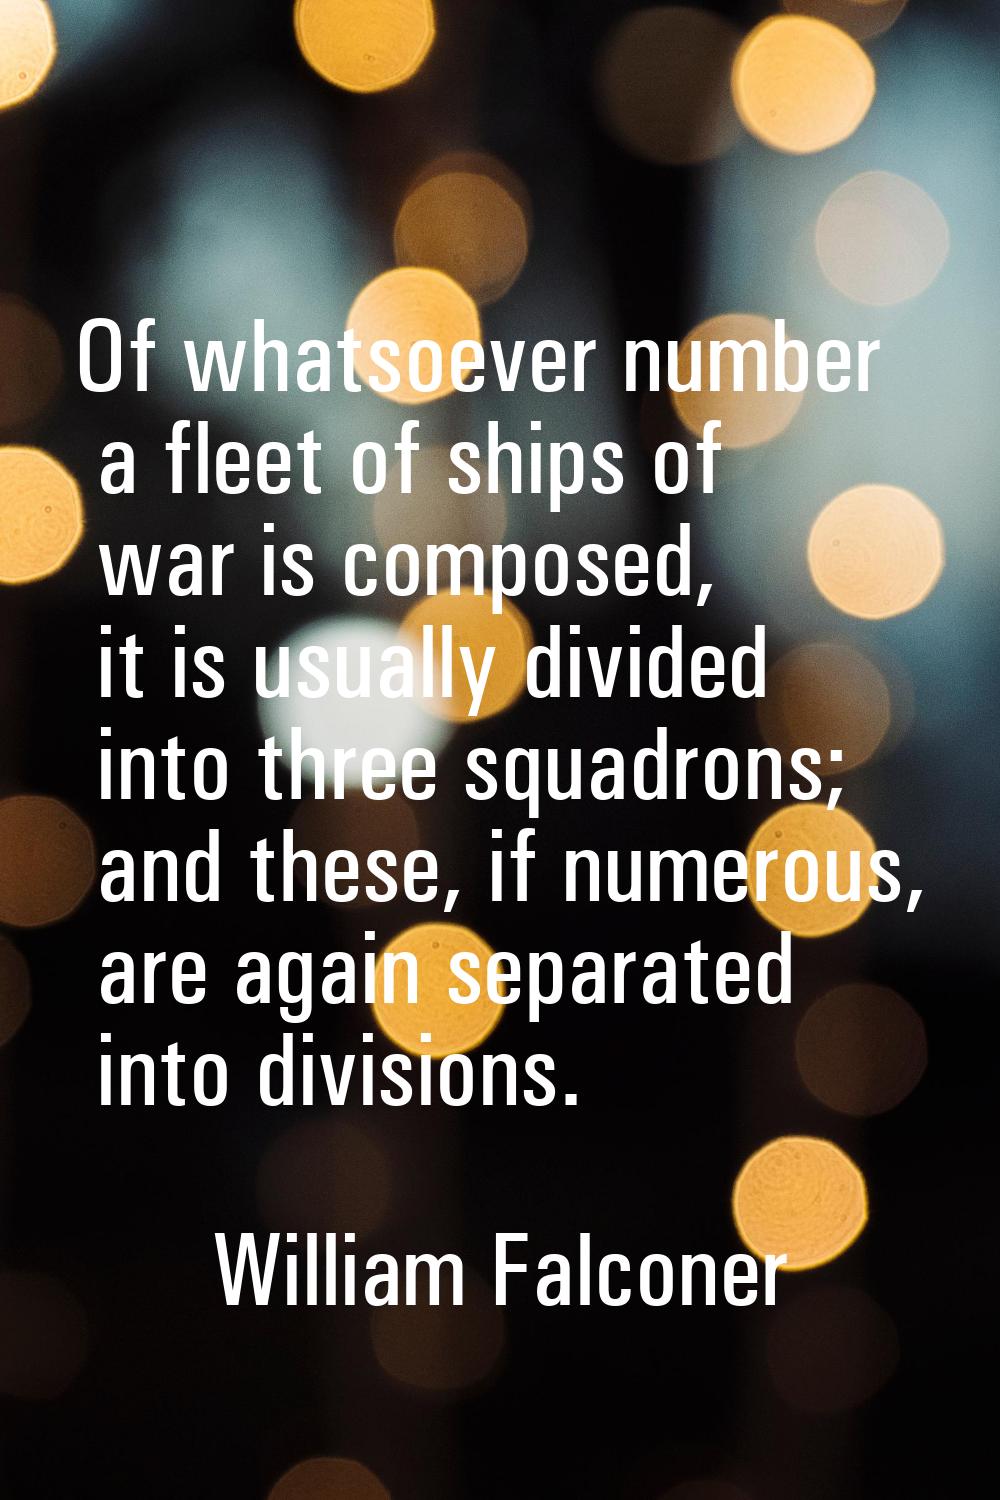 Of whatsoever number a fleet of ships of war is composed, it is usually divided into three squadron